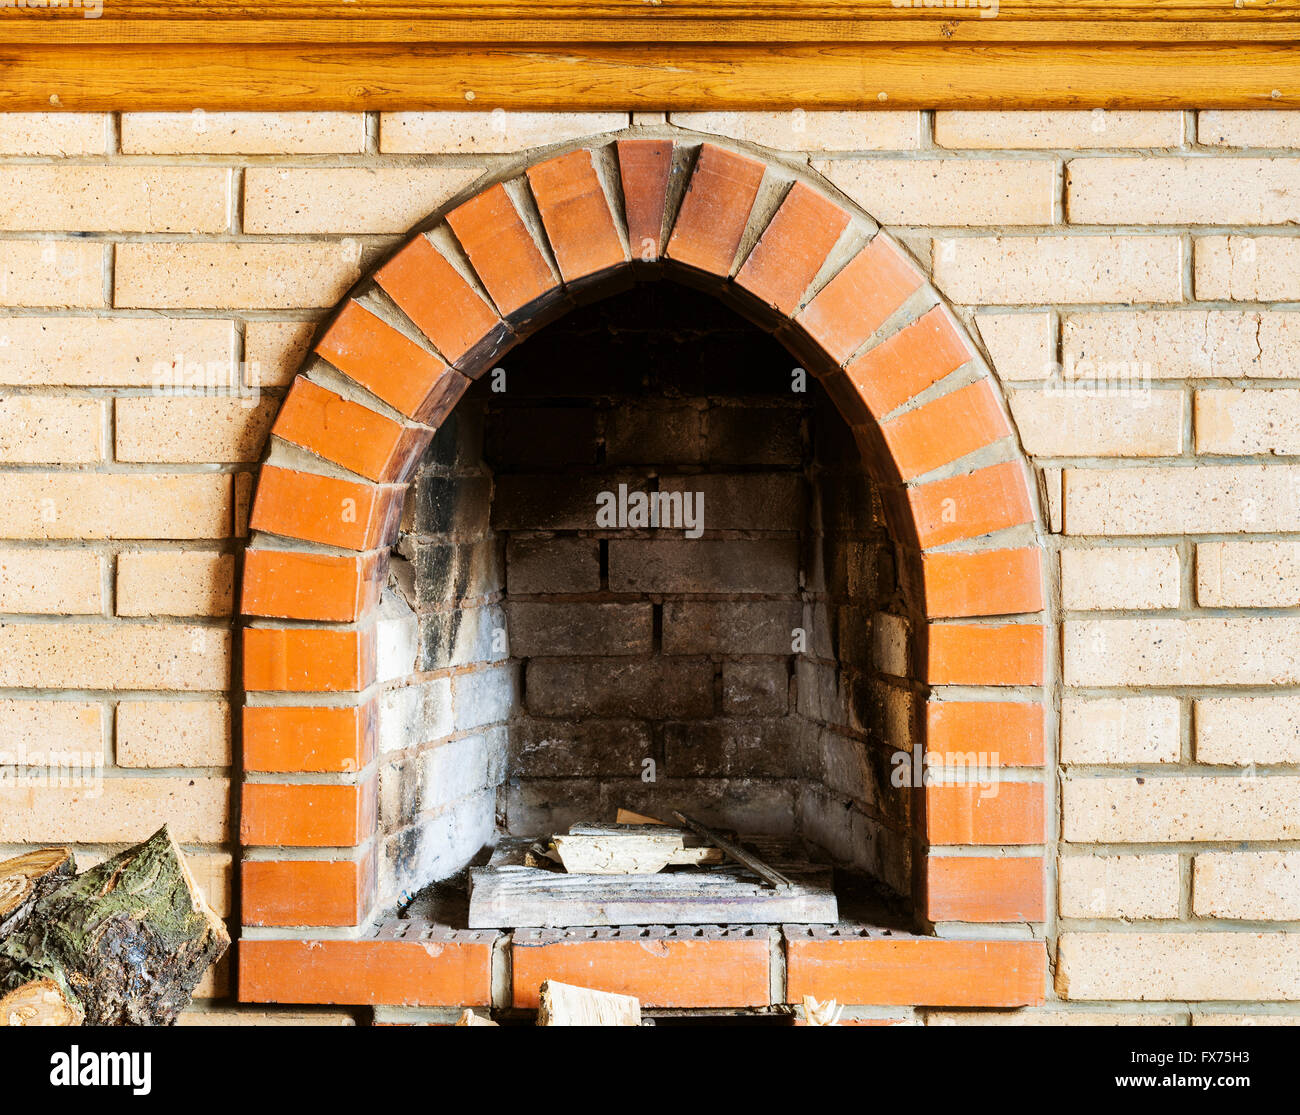 fire-box of not kindled brick fireplace indoor Stock Photo